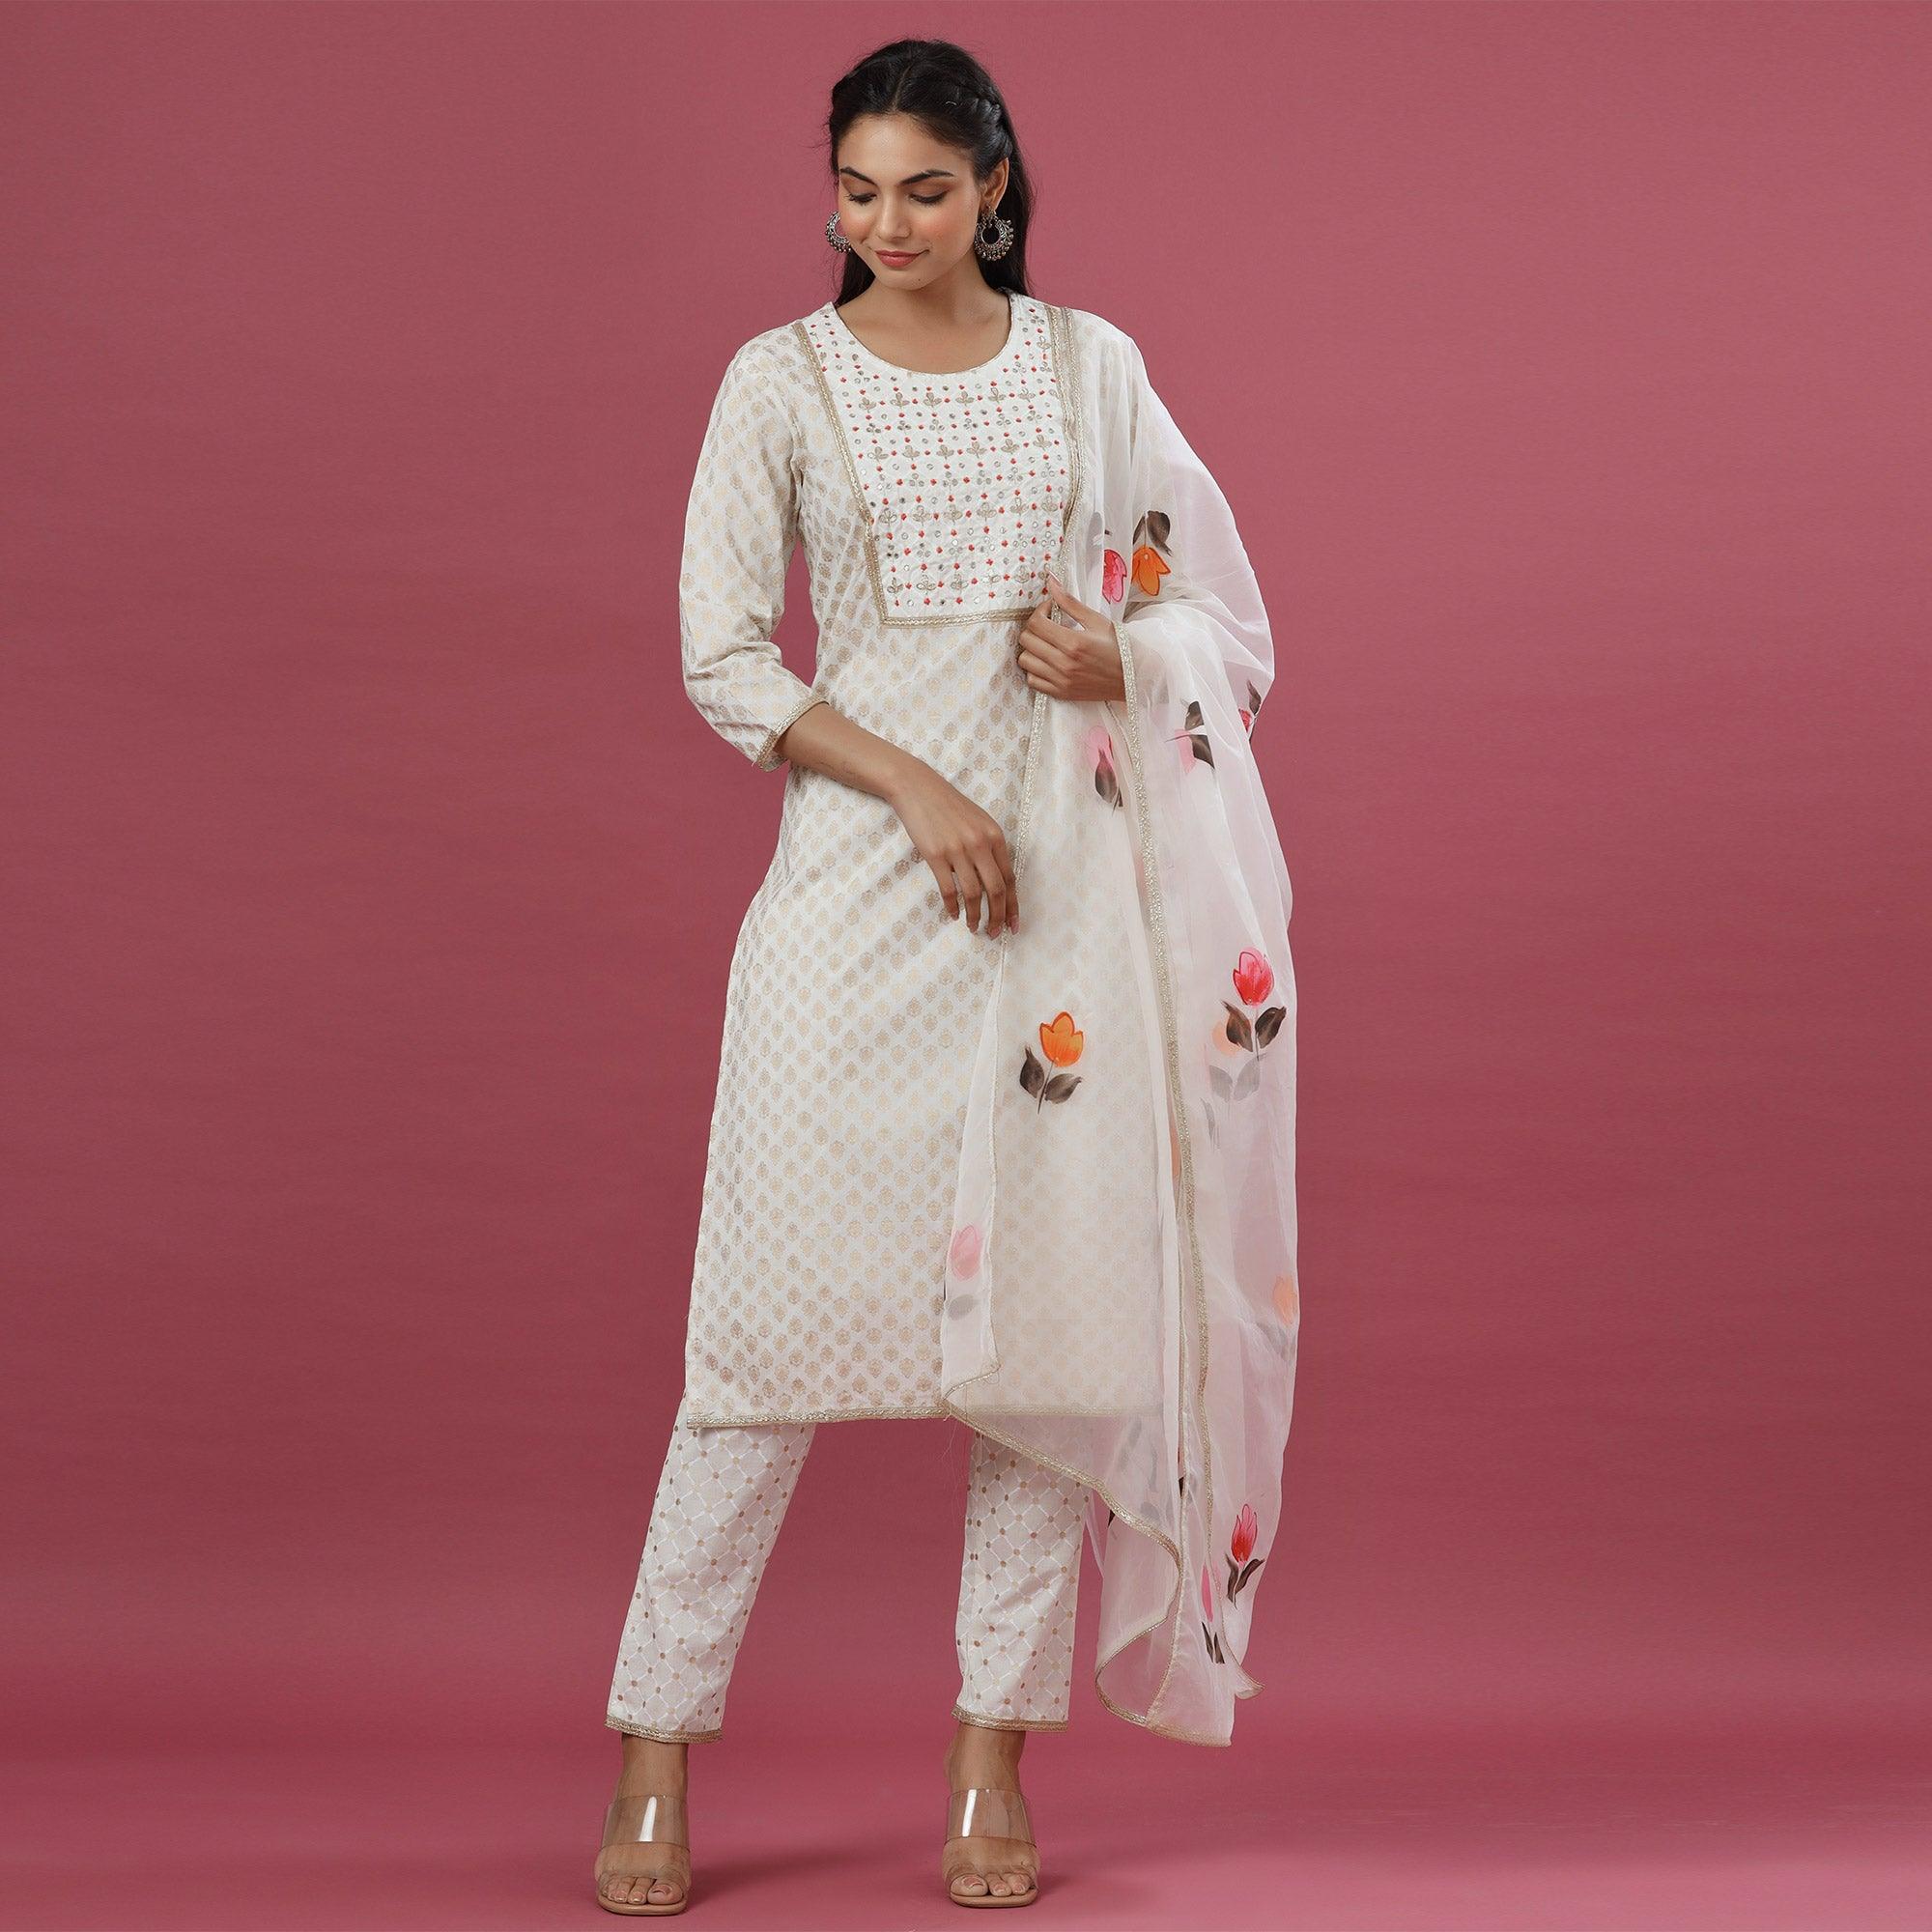 cargo pants and kurta | Cargo pants outfit, Off white pants, Cargo jeans